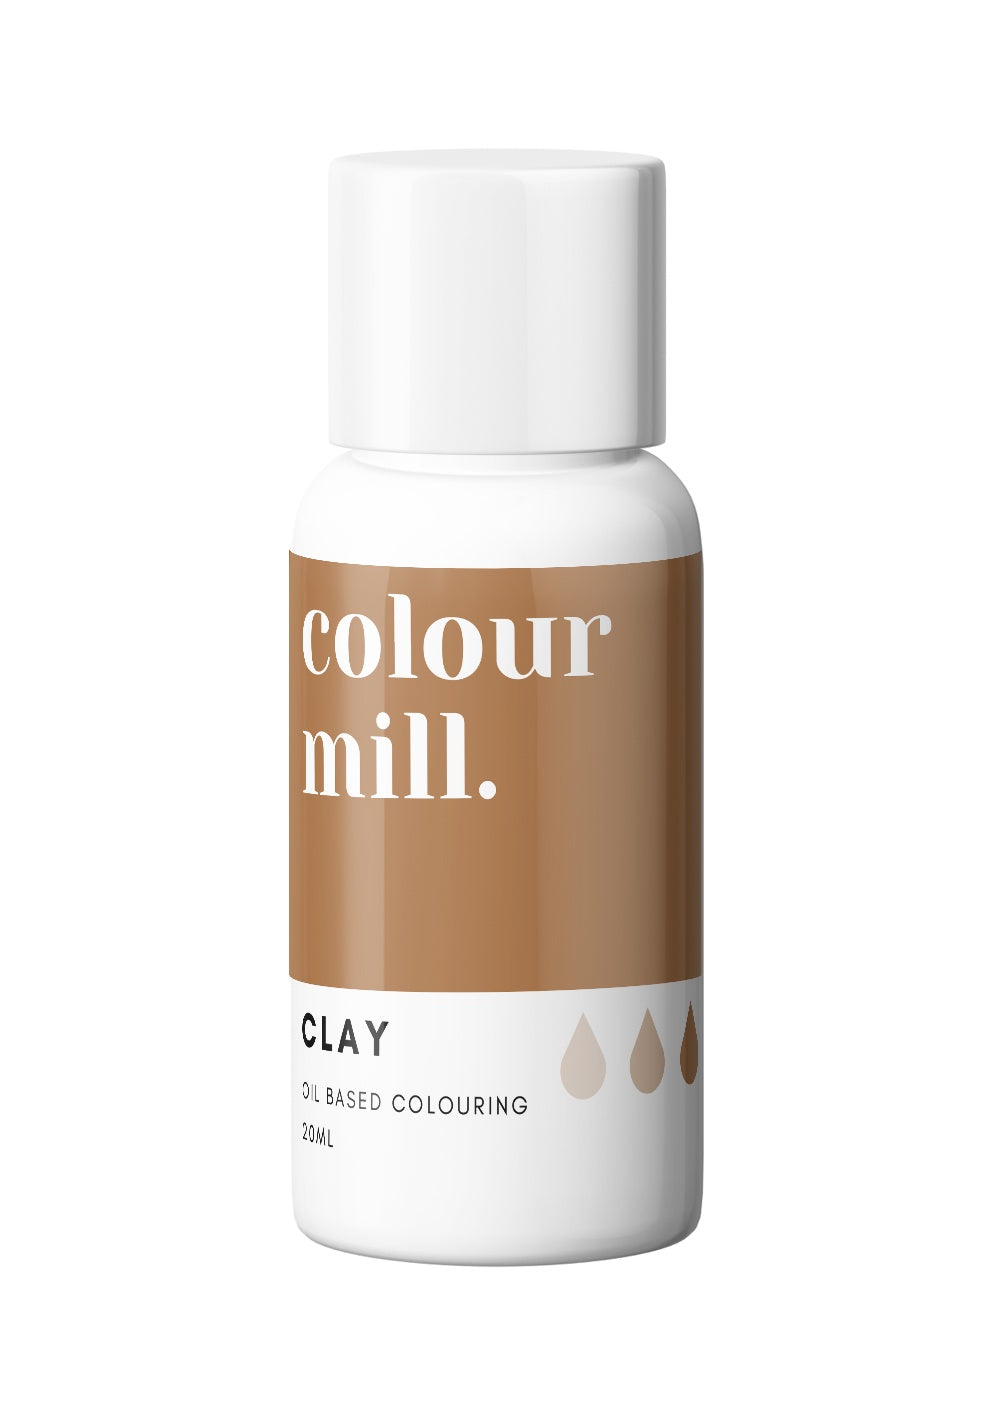 Colour Mill Oil Based Colouring 20ml - Clay